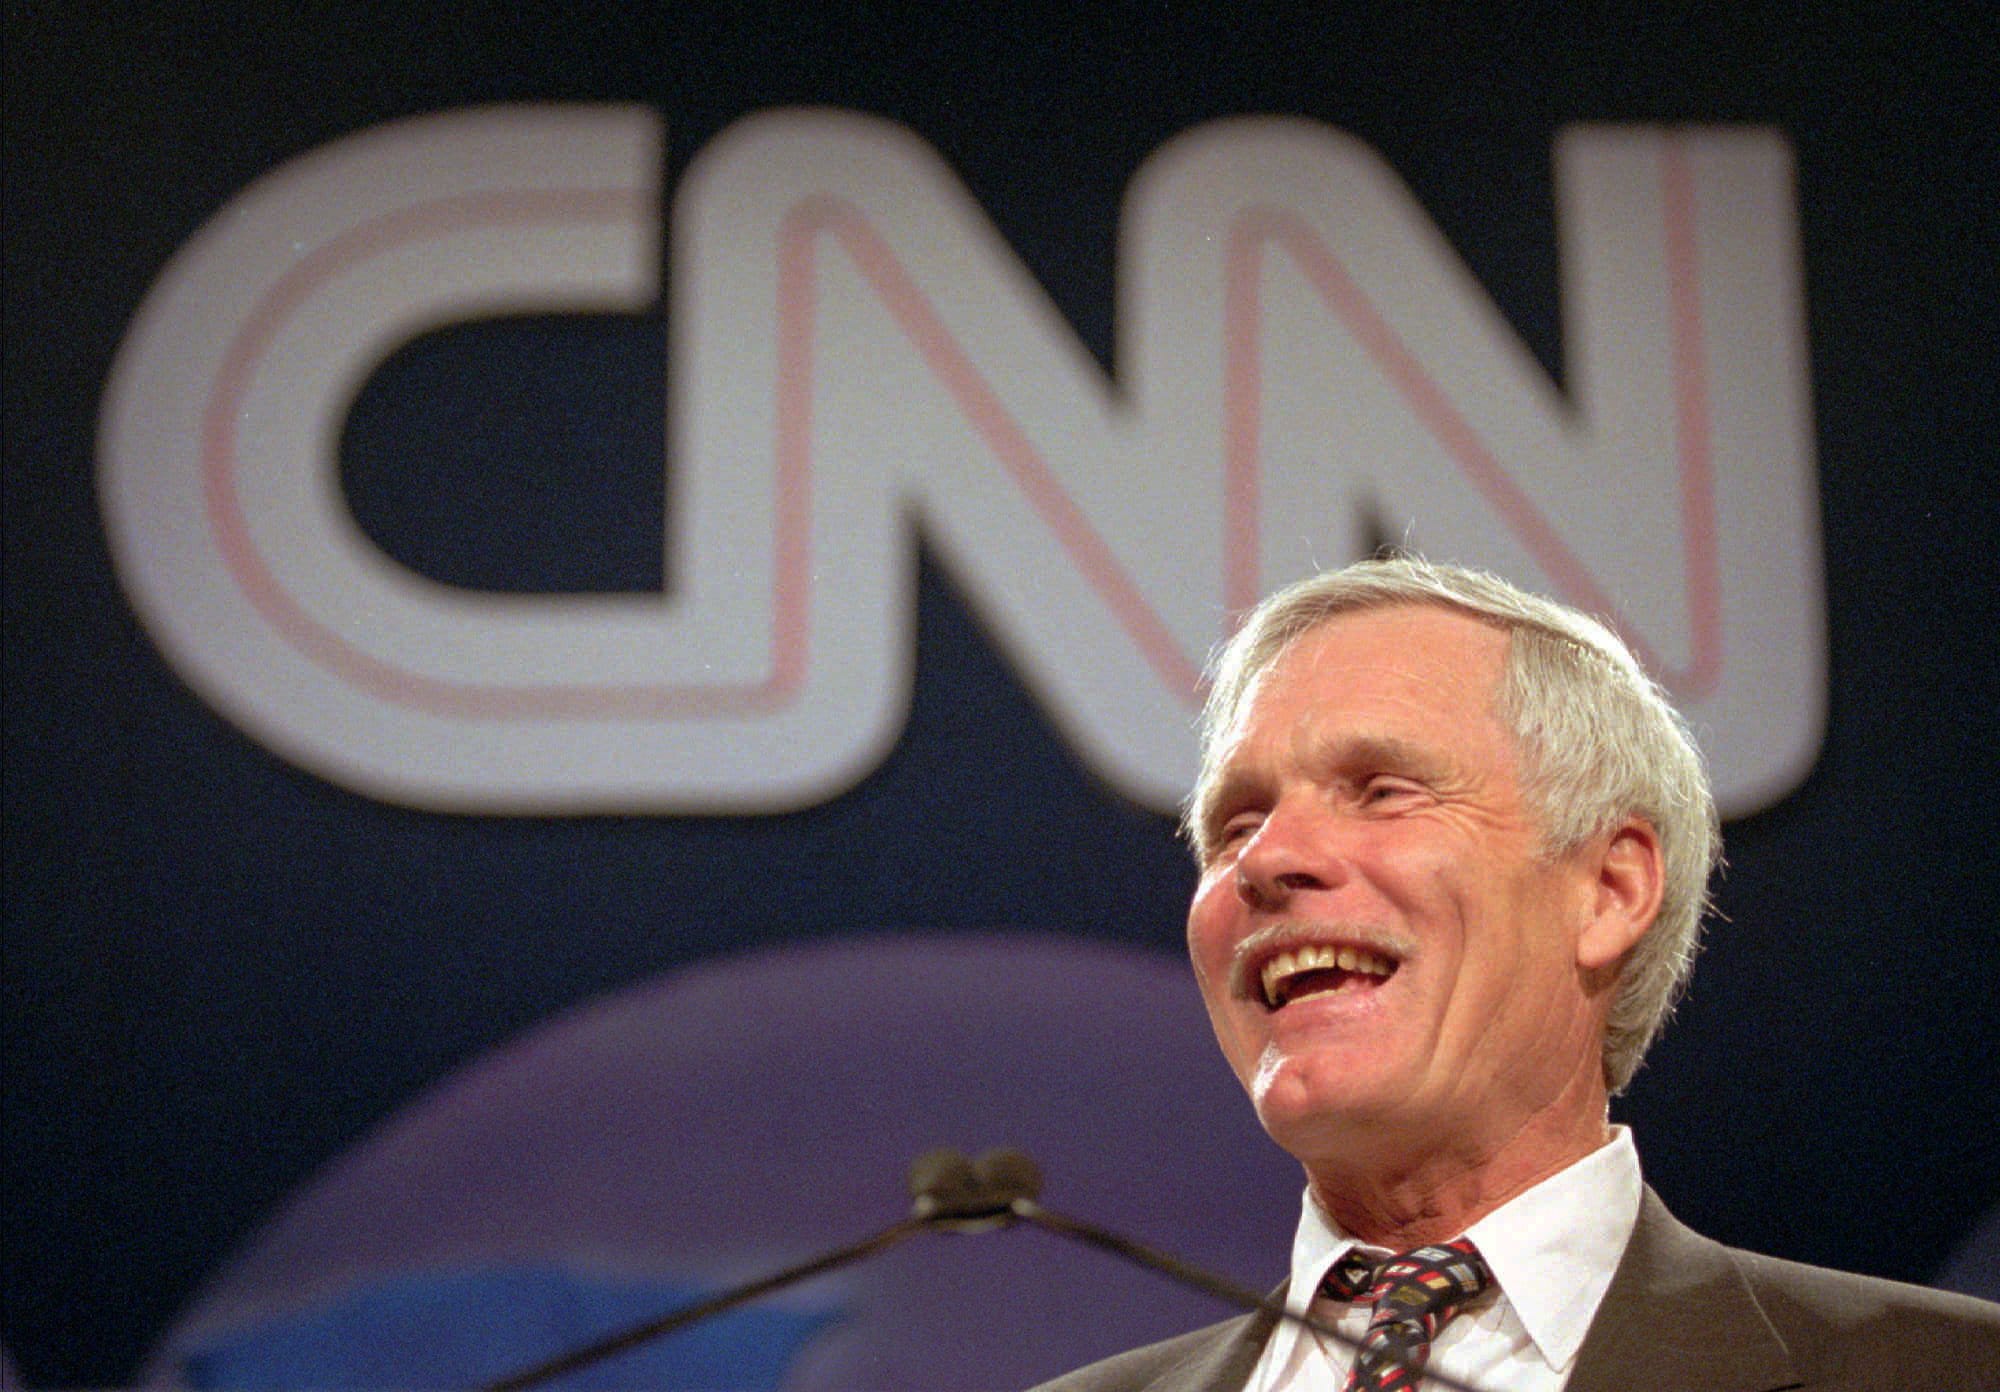 Ted Turner laughs as he speaks during the CNN World Report Contributors banquet May 4, 1995, in Atlanta.